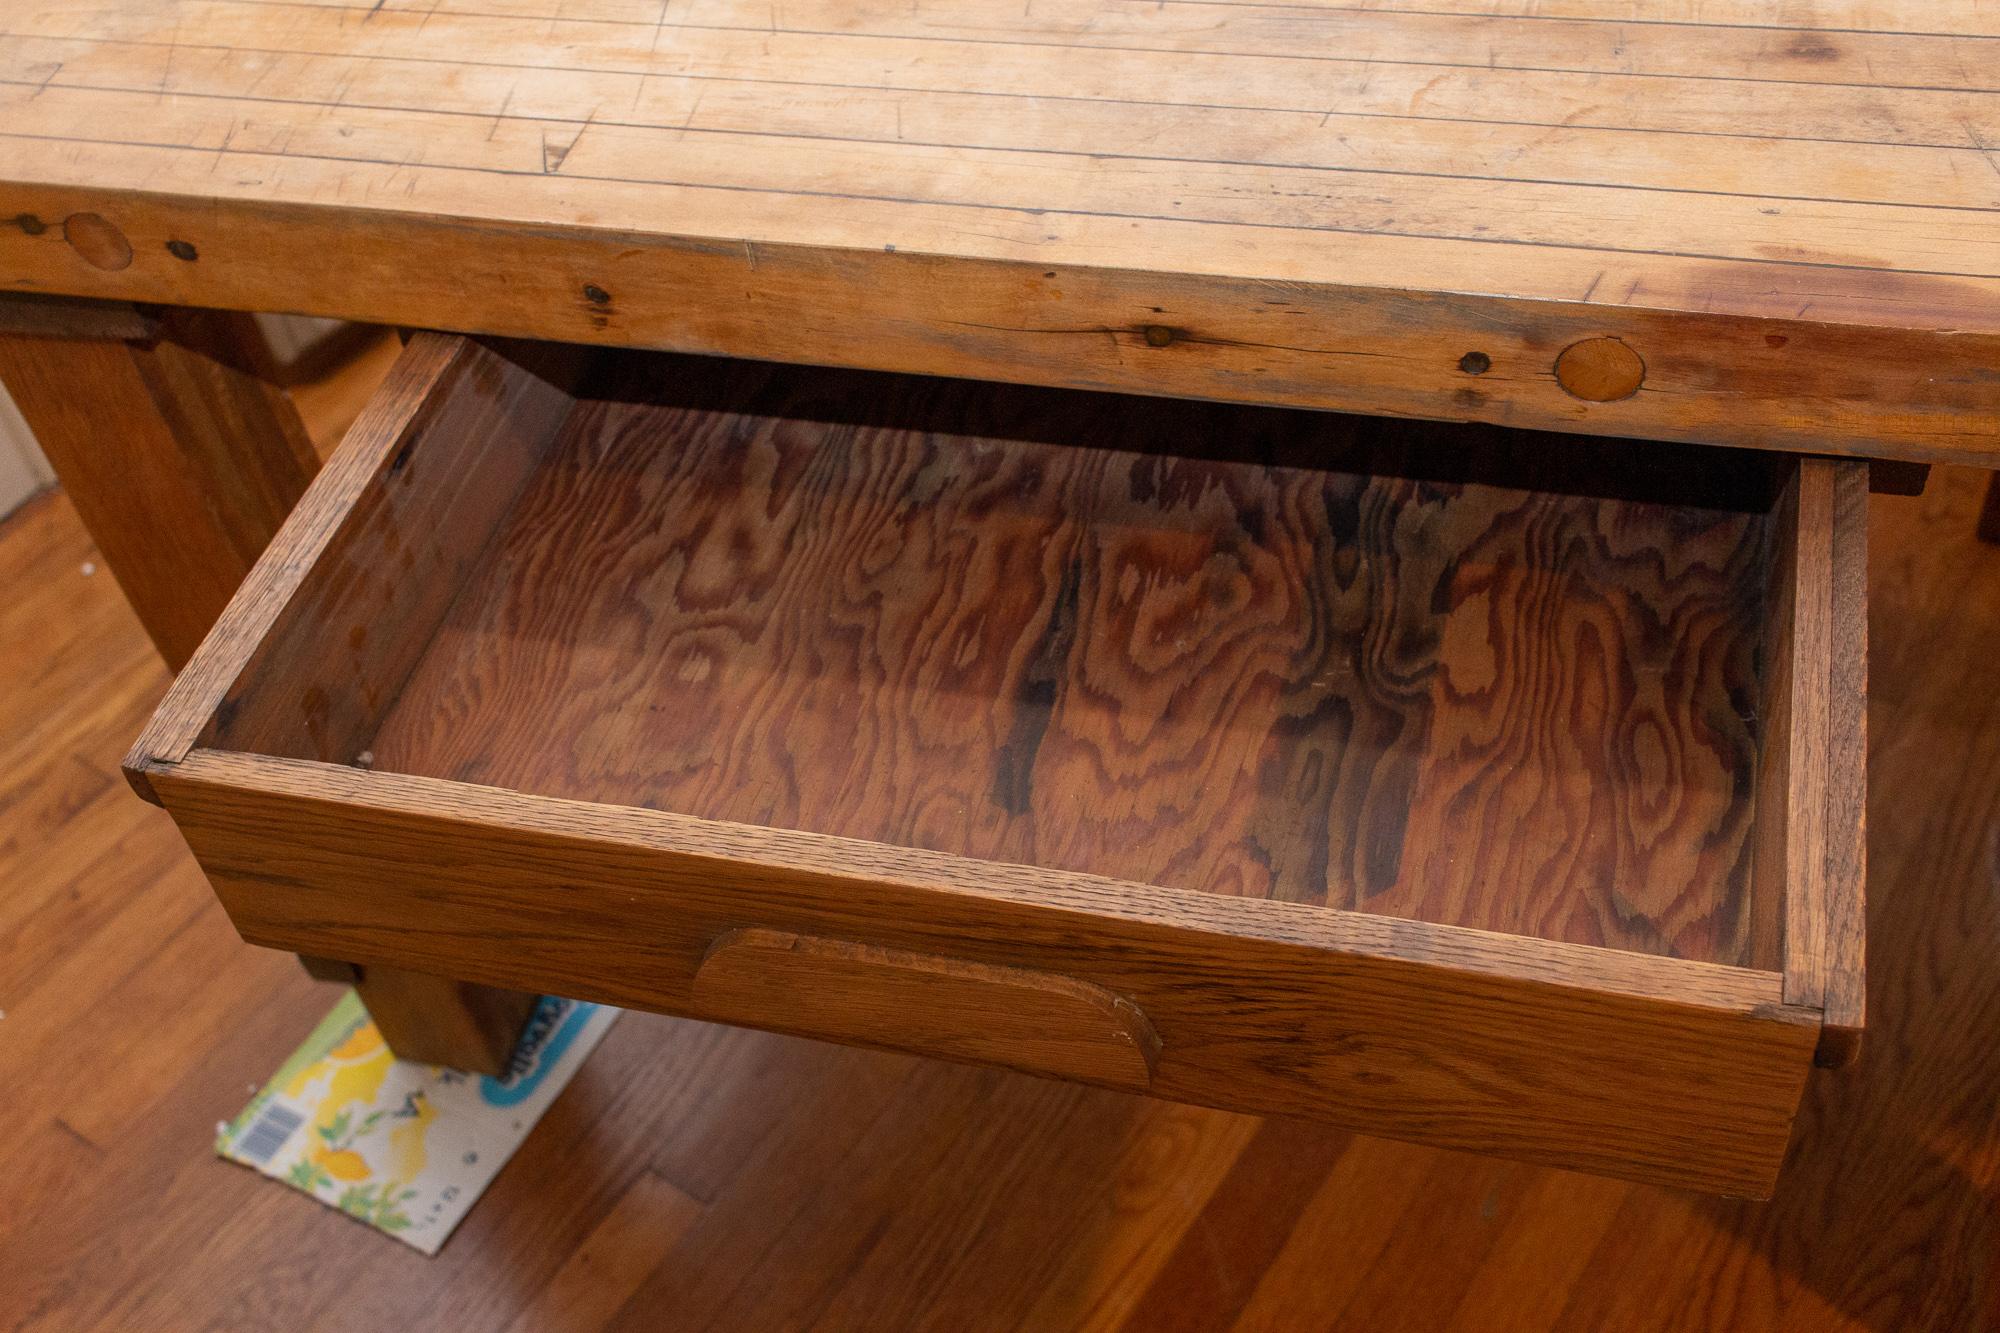 This large, vintage solid wood worktable features a butcher-block style top with two drawers. This piece would make a fantastic kitchen worktable or island, which can double as an eating area. Each leg is removable, making it much easier to